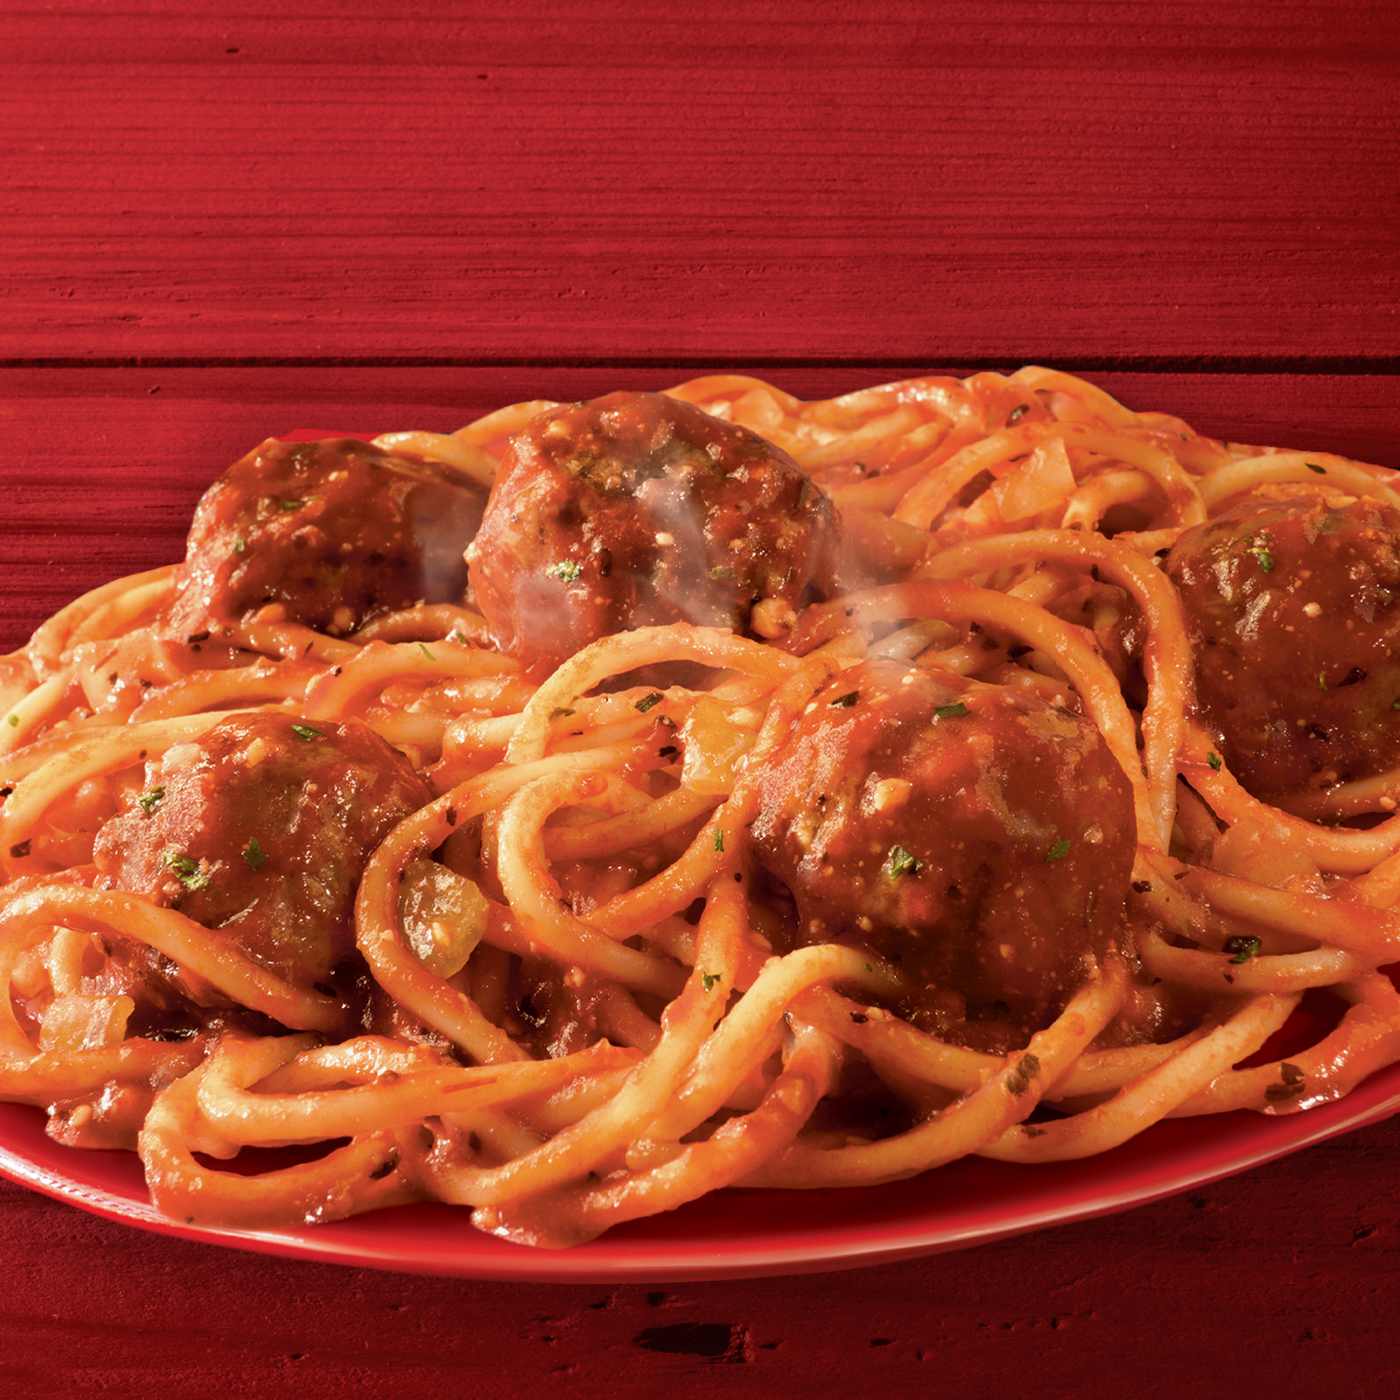 Banquet Spaghetti & Meatballs Frozen Meal; image 2 of 5